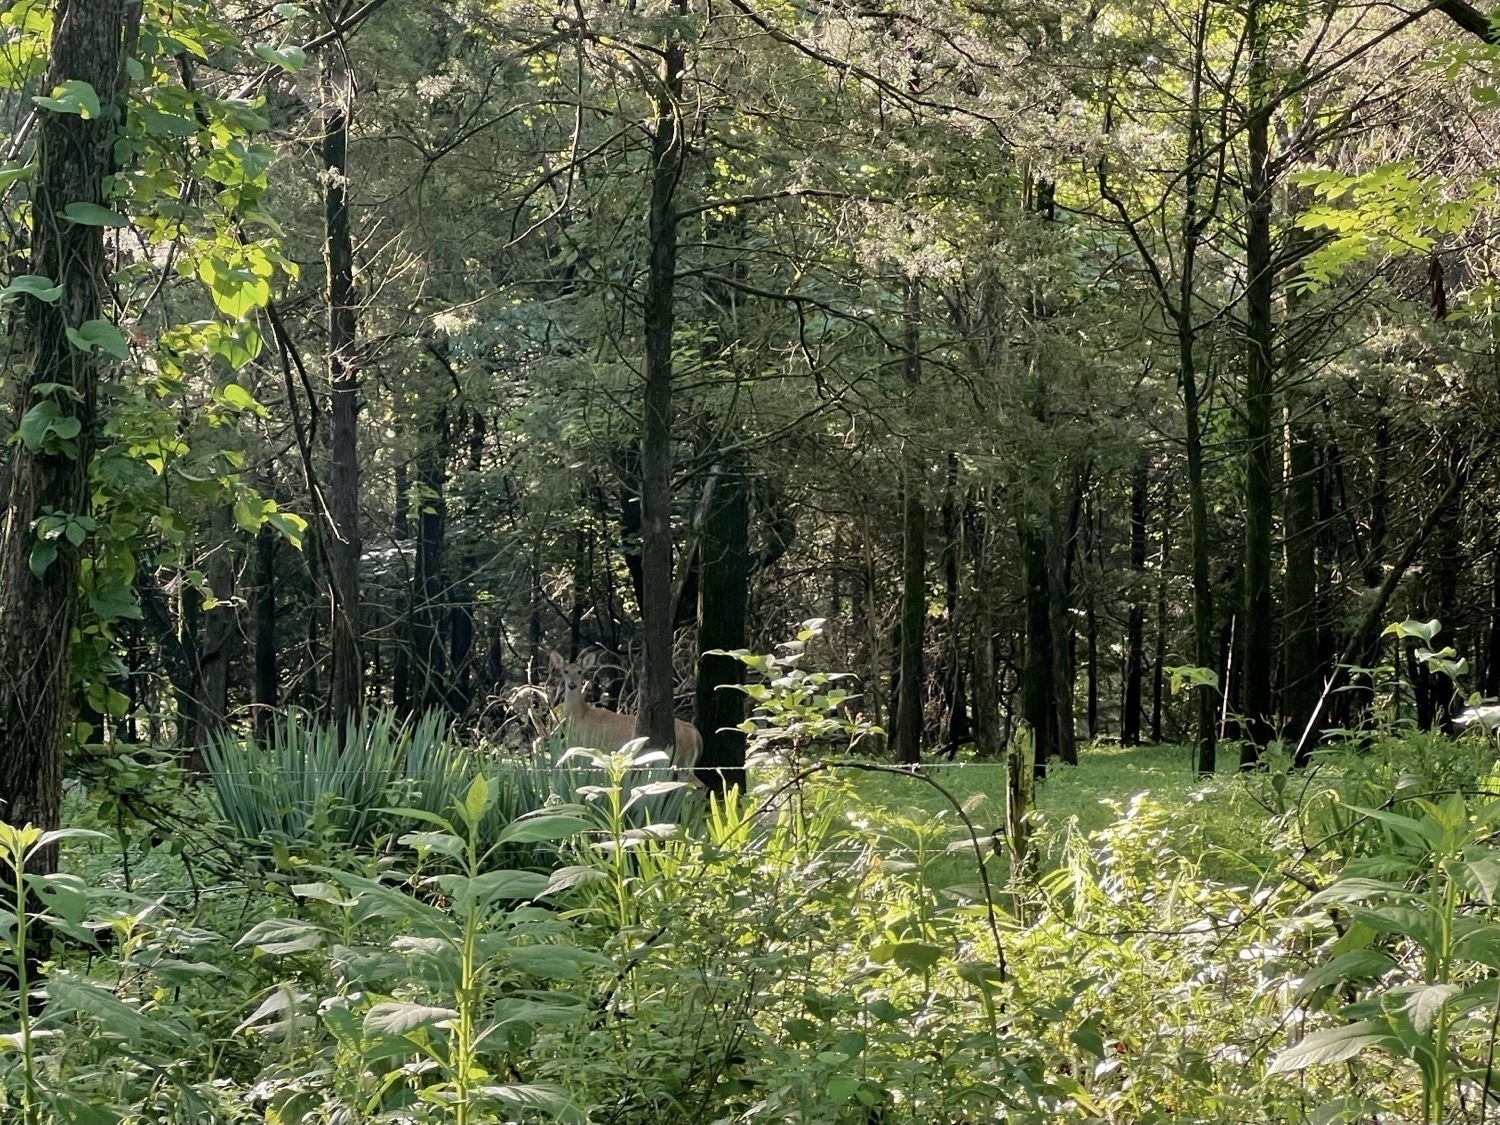 A lush green carpet of grass in the soft light of a woodland. Somewhat hidden but in plain view a whitetail deer looks out at the photographer. The image is frame by a foreground mix of tall native plants.